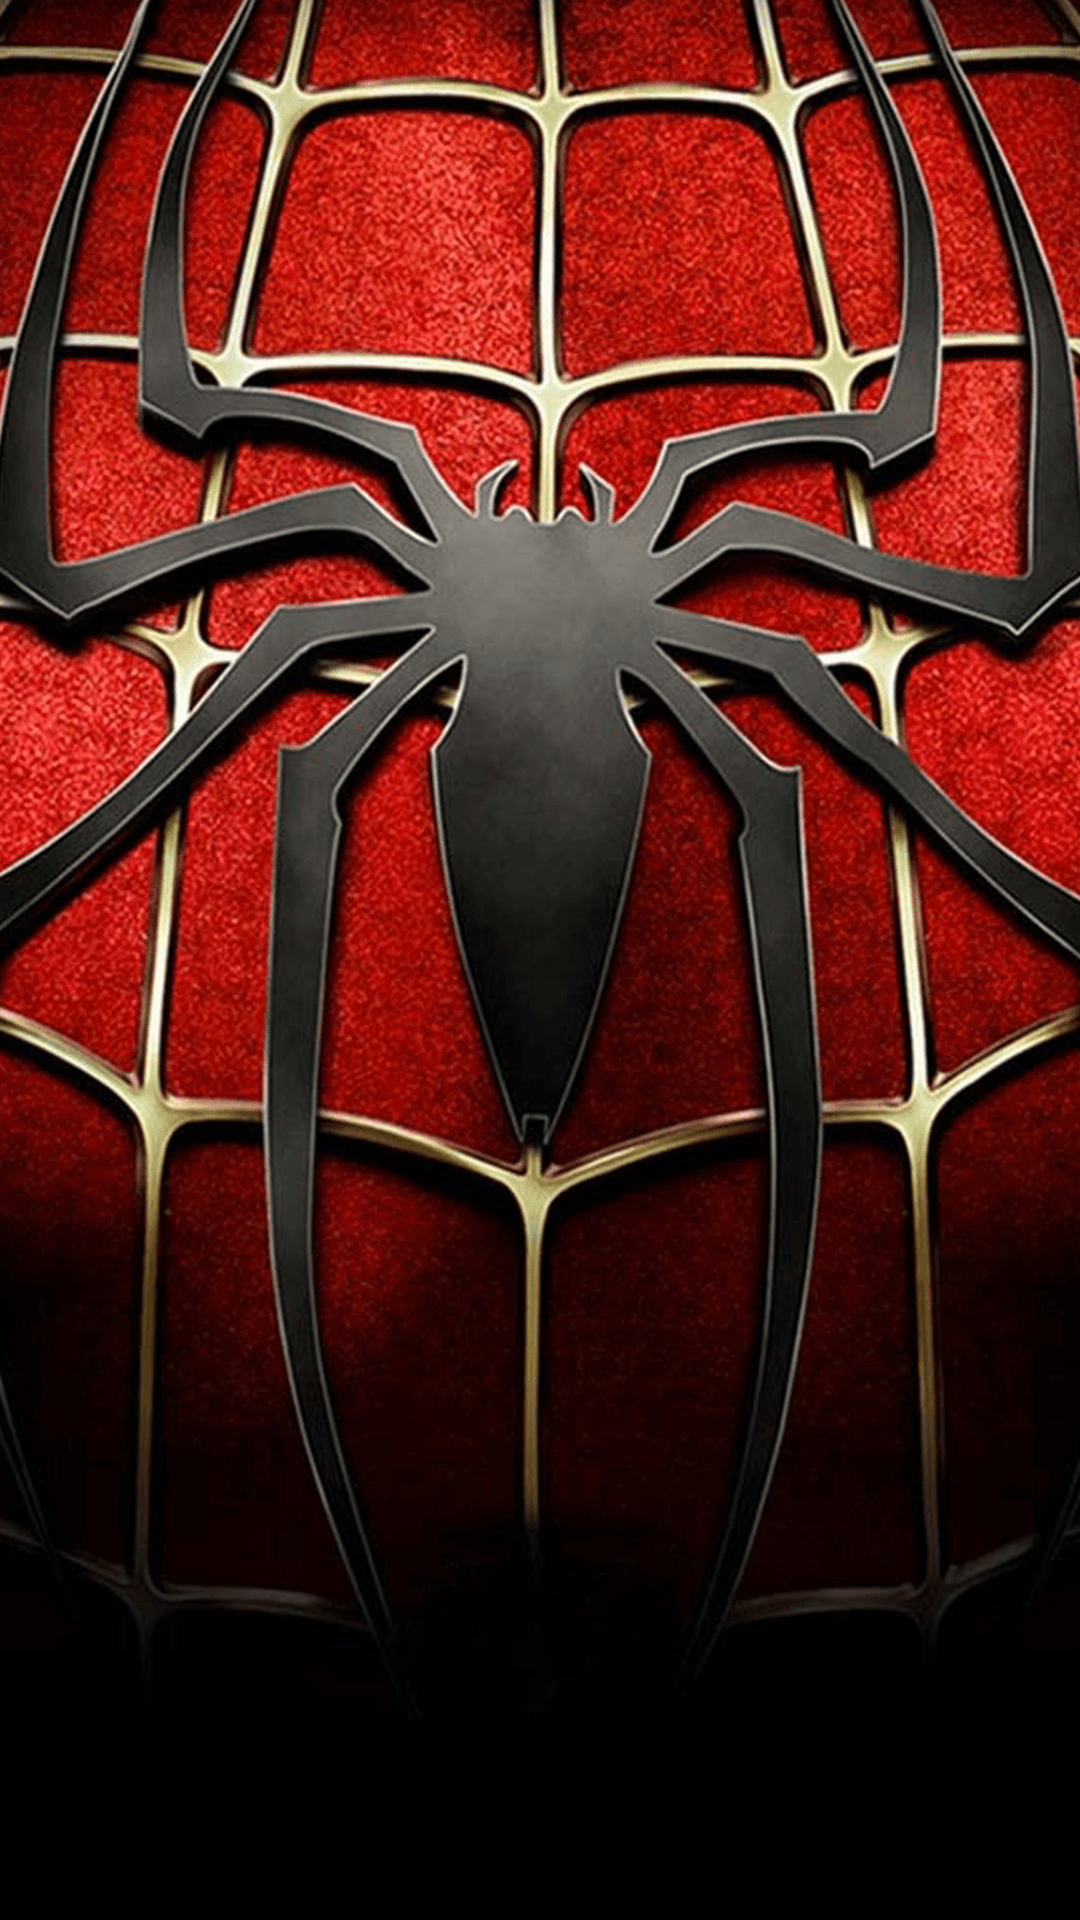 Download Our HD Spiderman Suit Wallpaper For Android Phones .0530